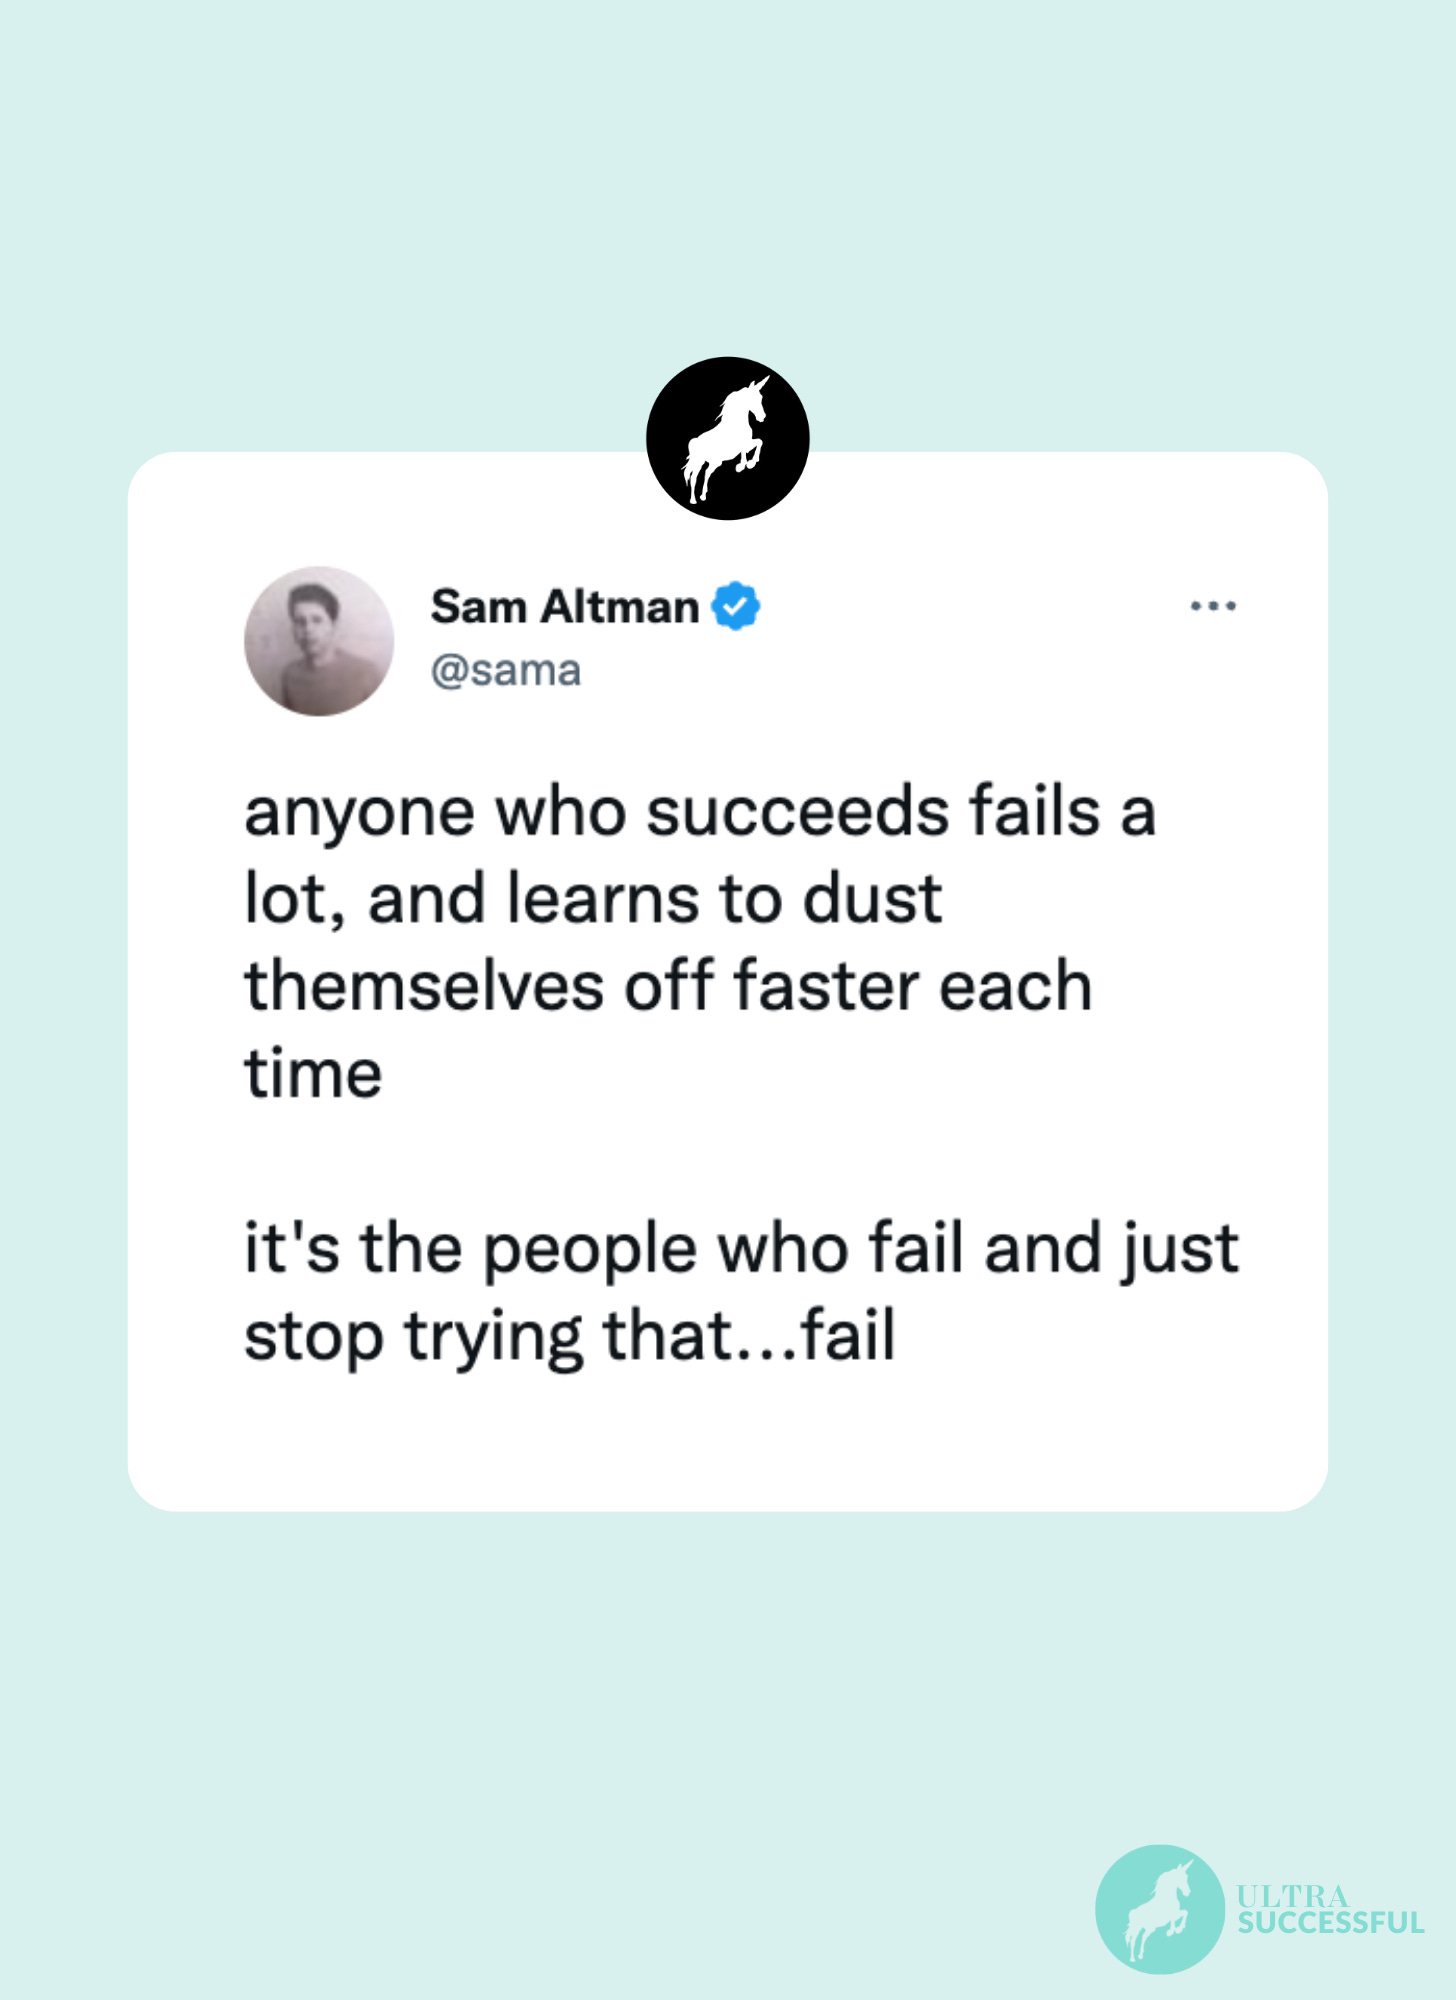 @sama: anyone who succeeds fails a lot, and learns to dust themselves off faster each time  it's the people who fail and just stop trying that...fail